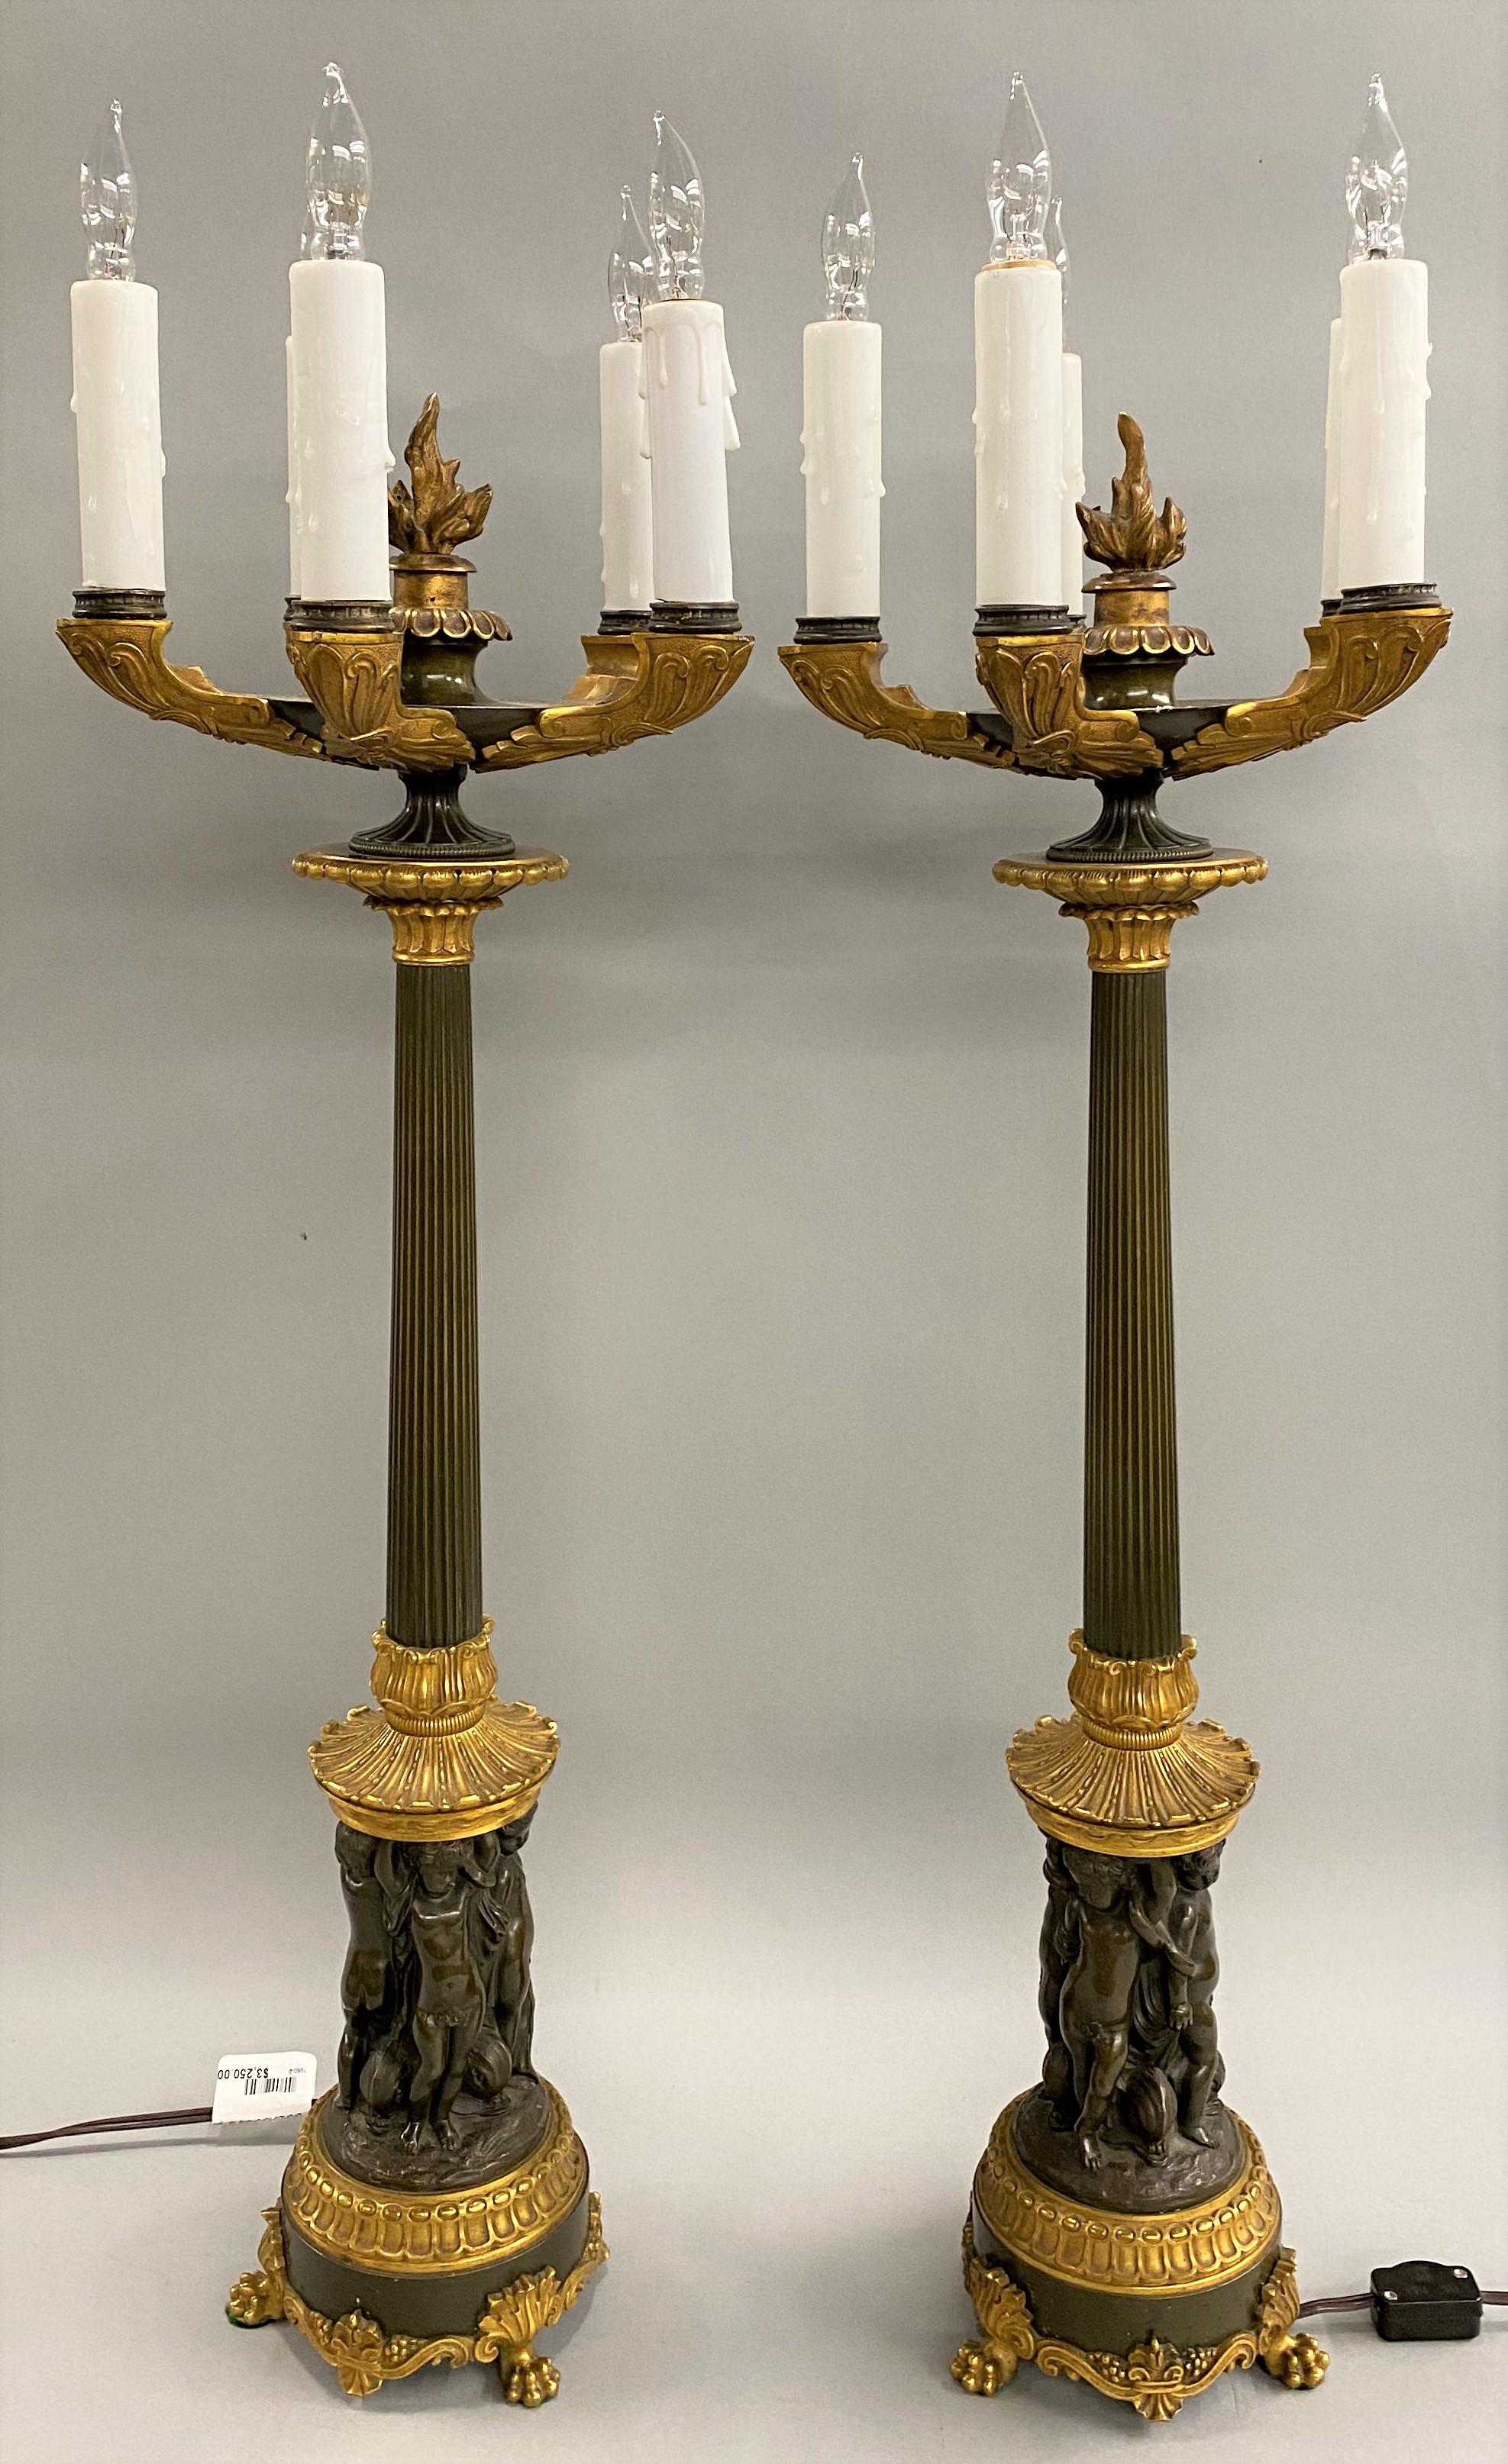 Pair of Continental Gilt and Bronze Five-Light Candelabra Lamps with Putti 1